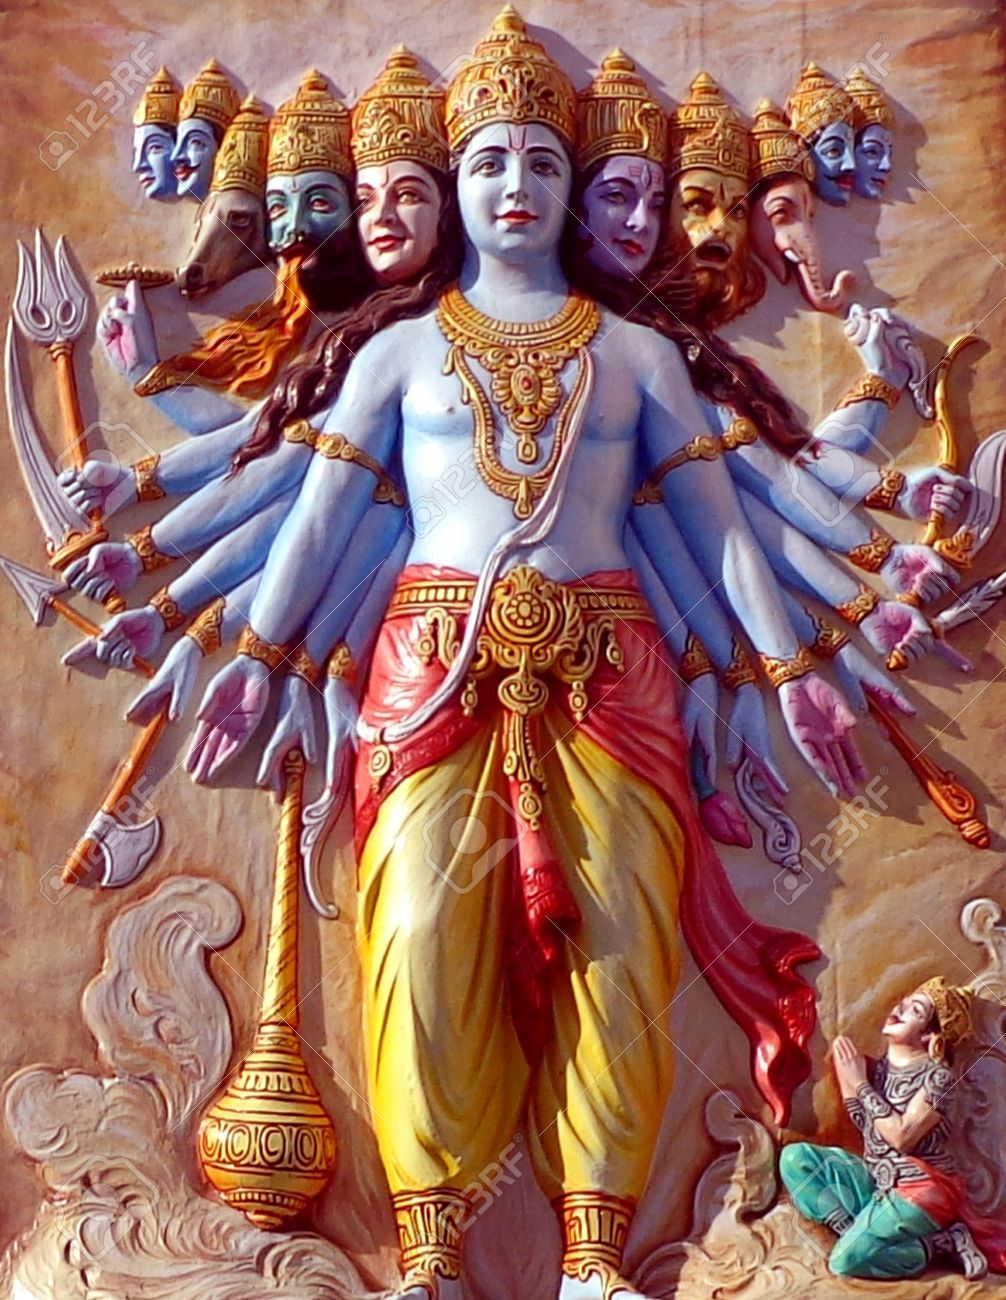 44126216-krishna-is-considered-the-supreme-deity-worshipped-across-many-traditions-of-hinduism-in-a-variety-o.jpg